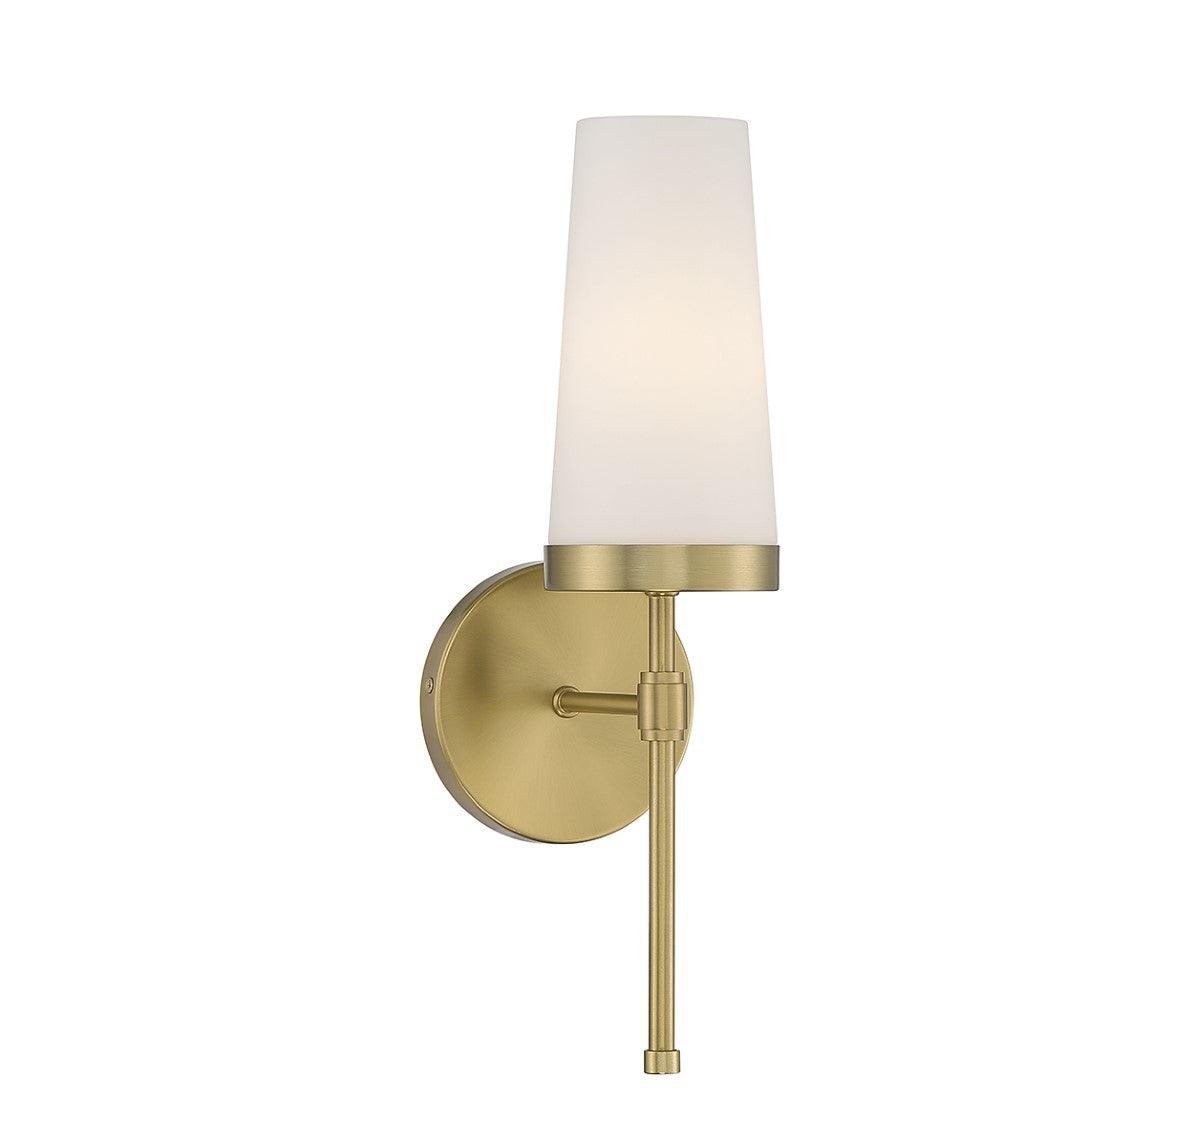 Haynes 16 in. Wall Sconce